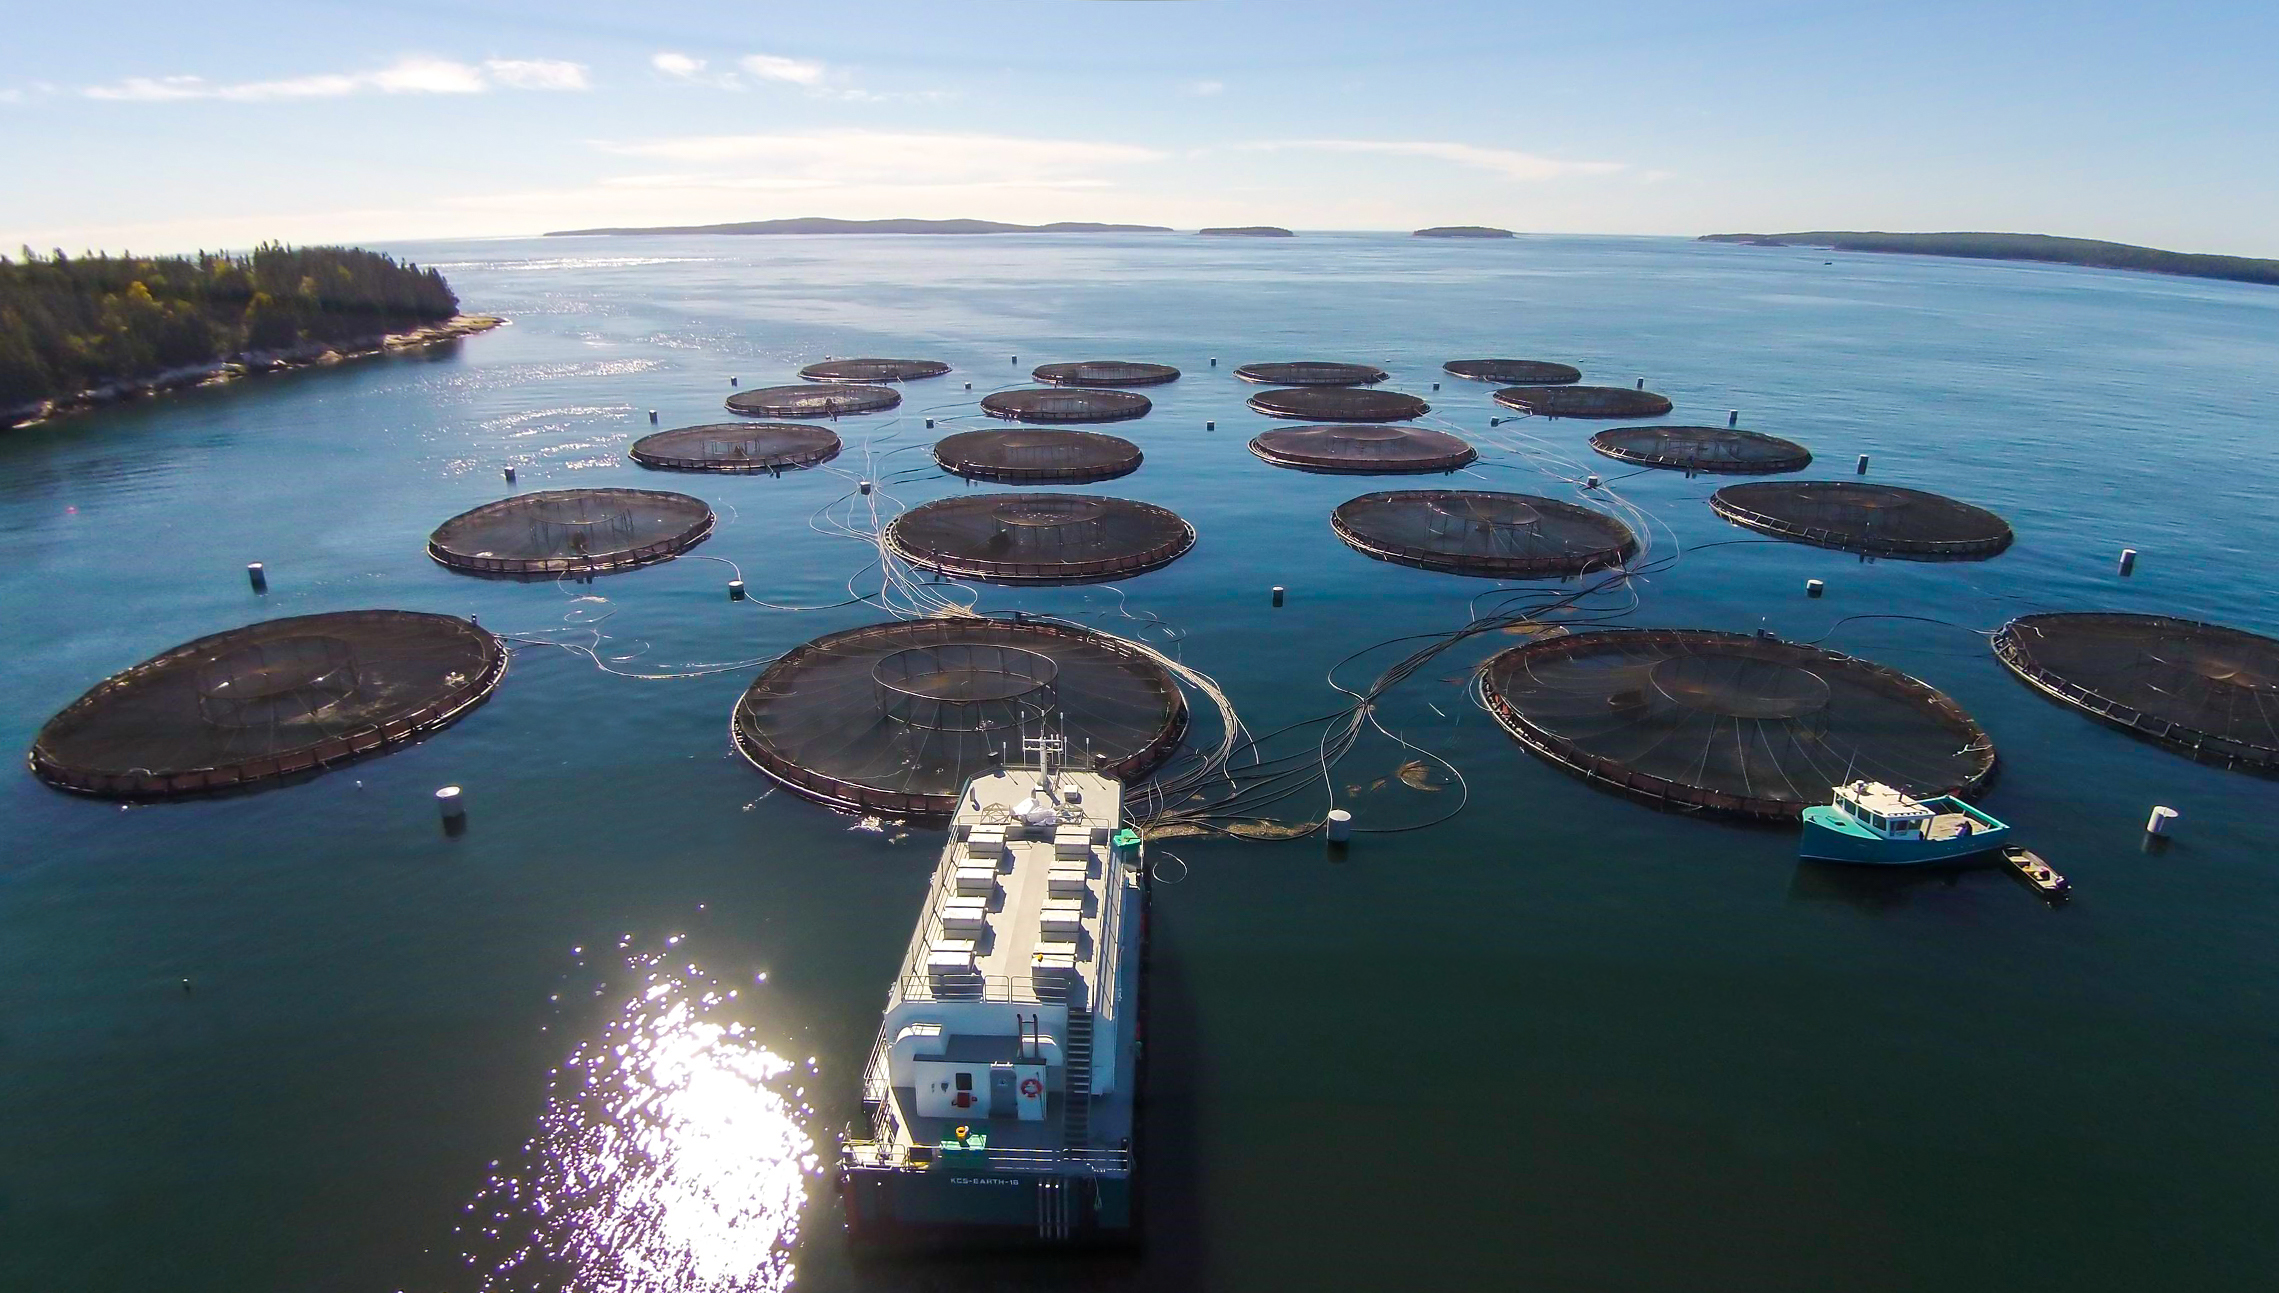 Salmon Farming has Come a Long Way From the Early Days | Maine Boats Homes & Harbors